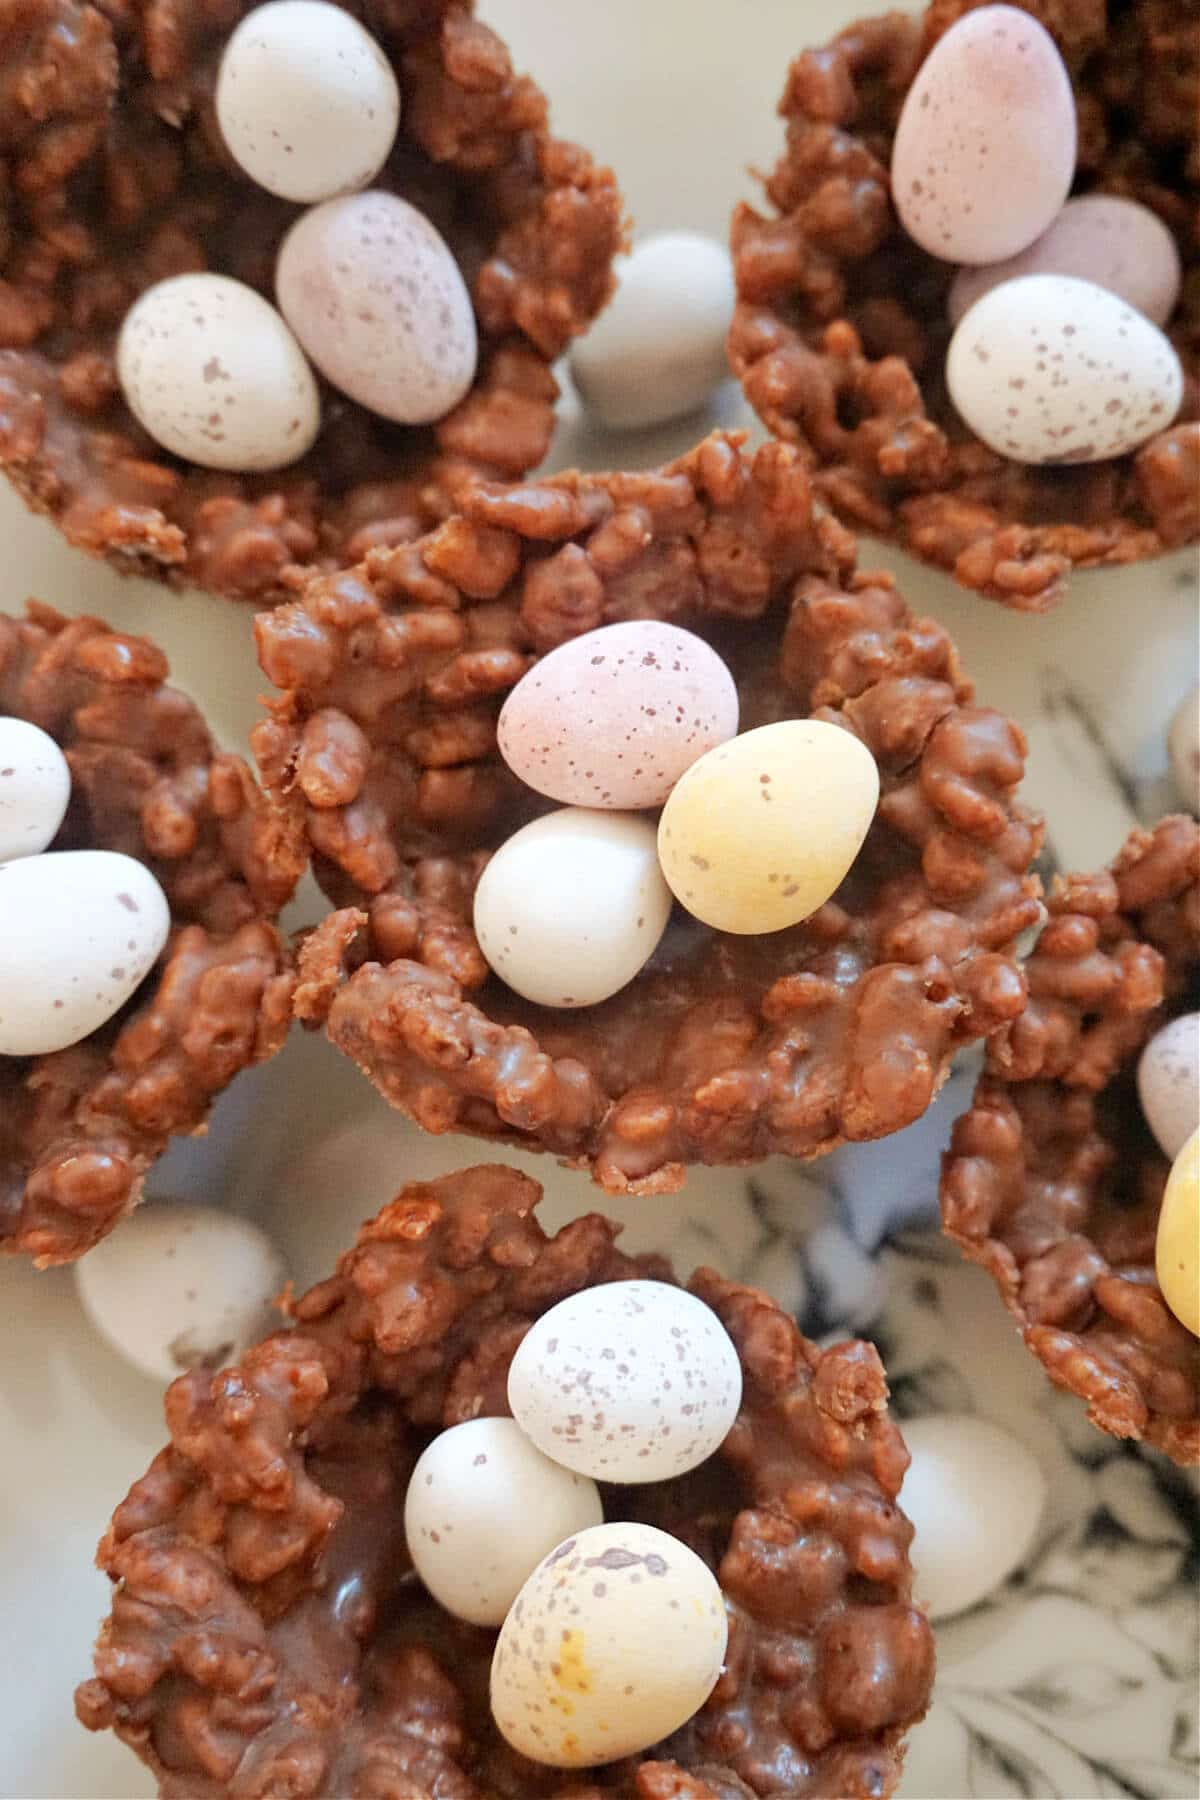 Close-up shot of a chocolate rice krispie nest with 3 mini eggs